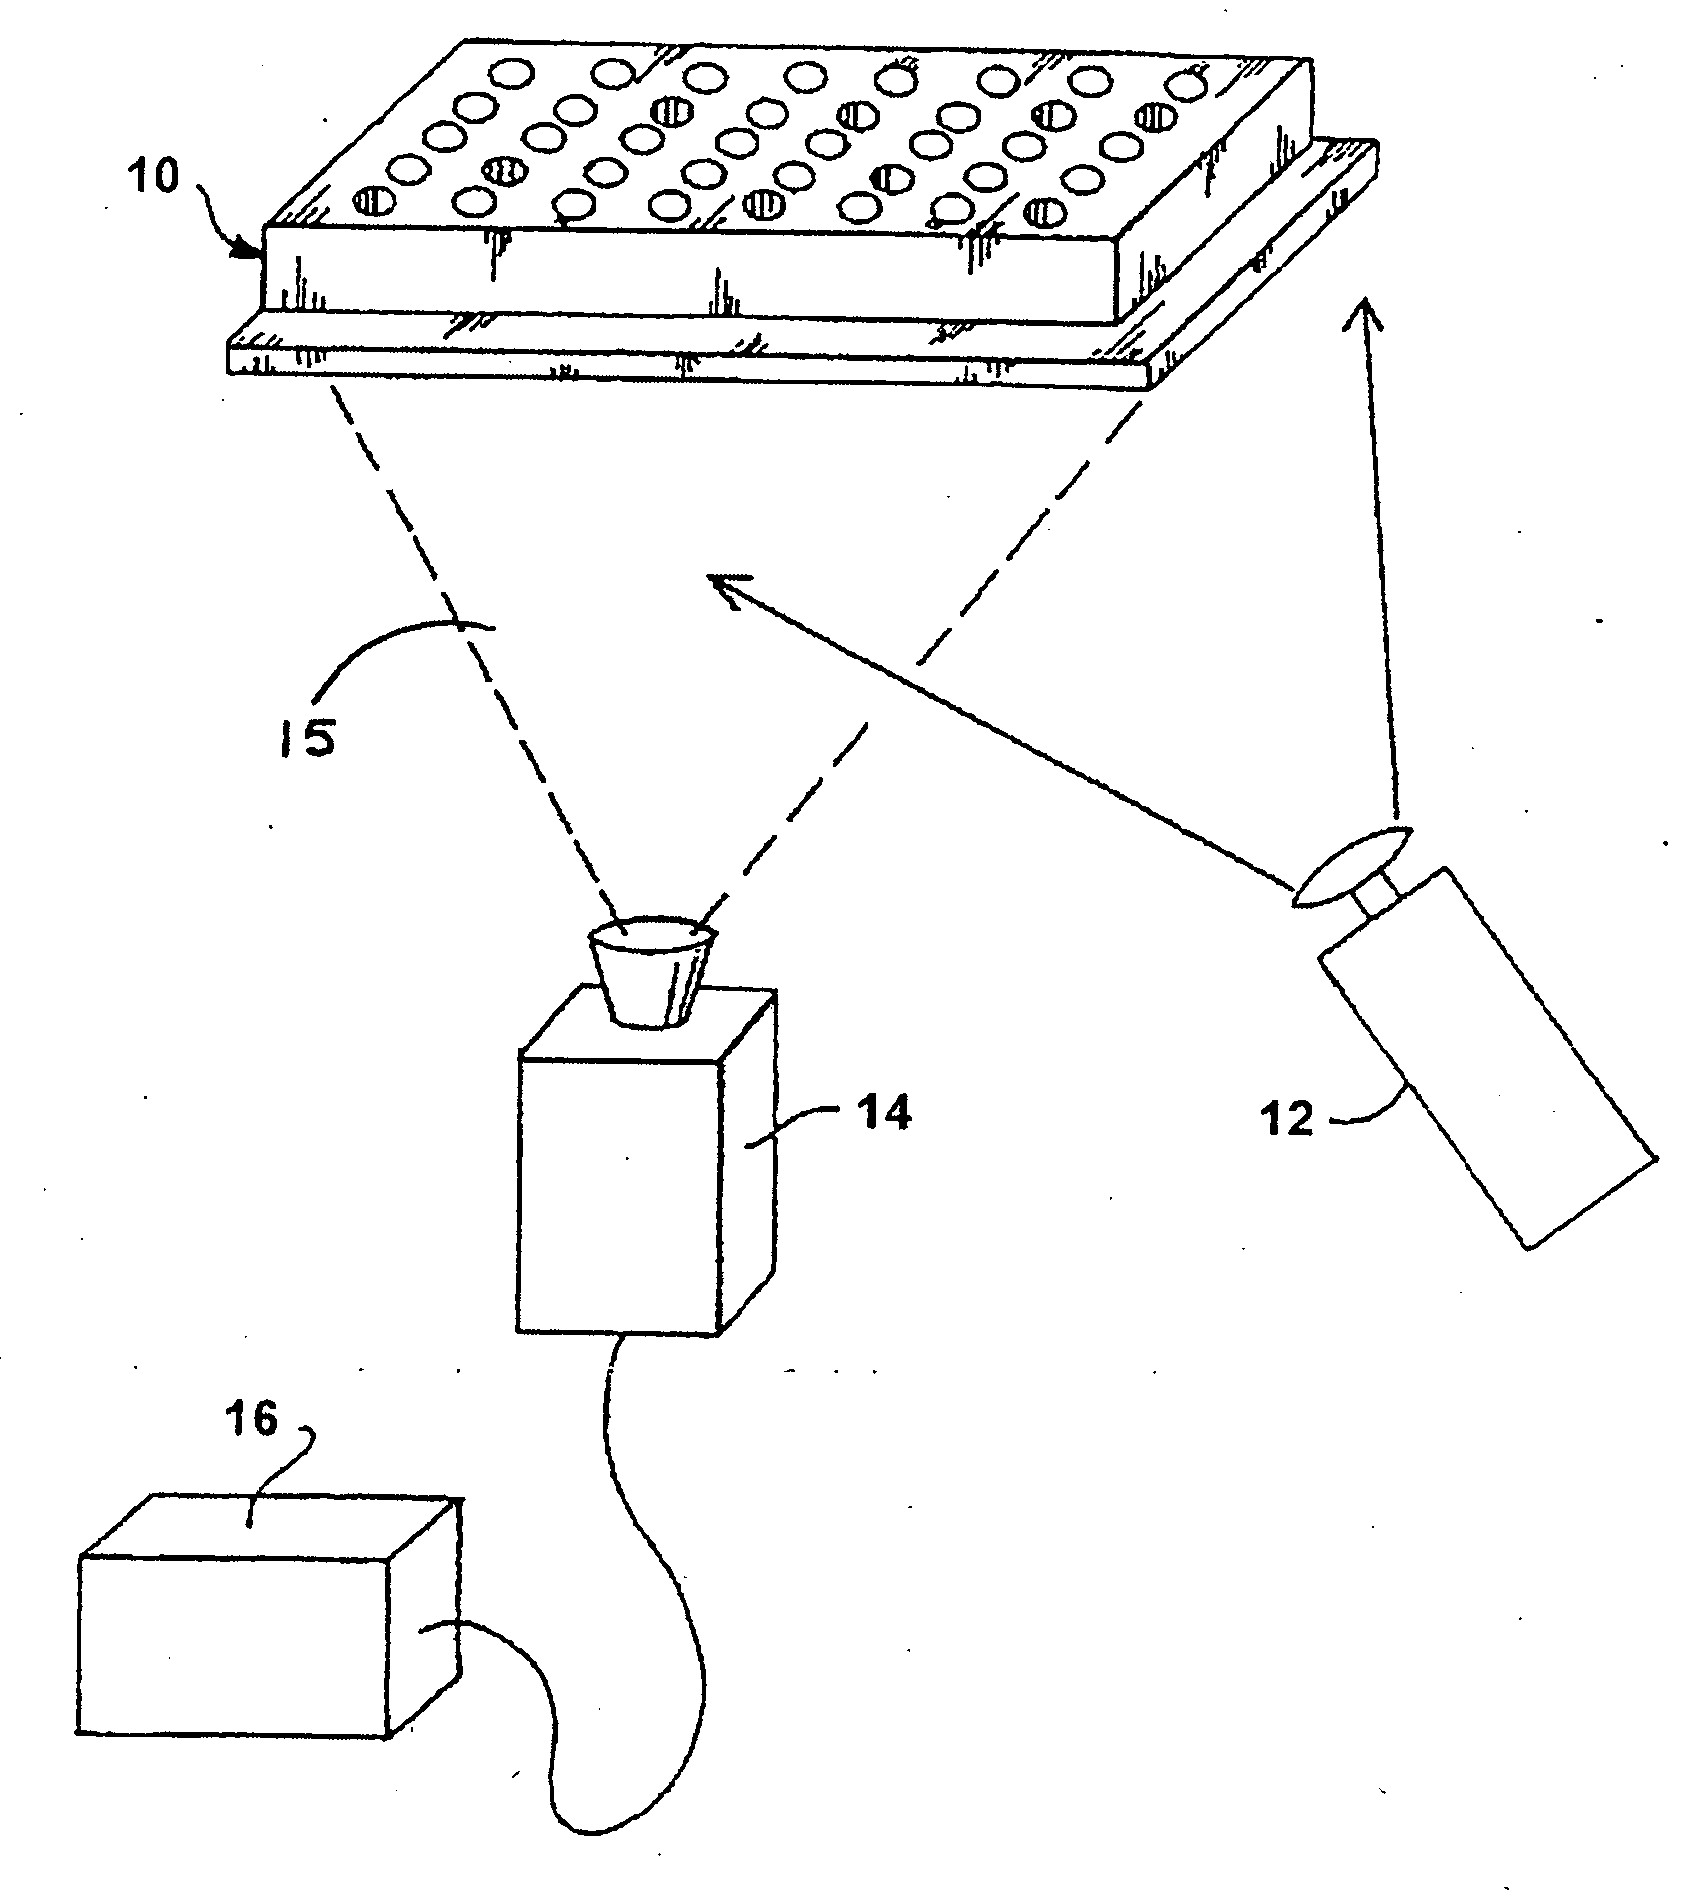 Reflective optic system for imaging microplate readers